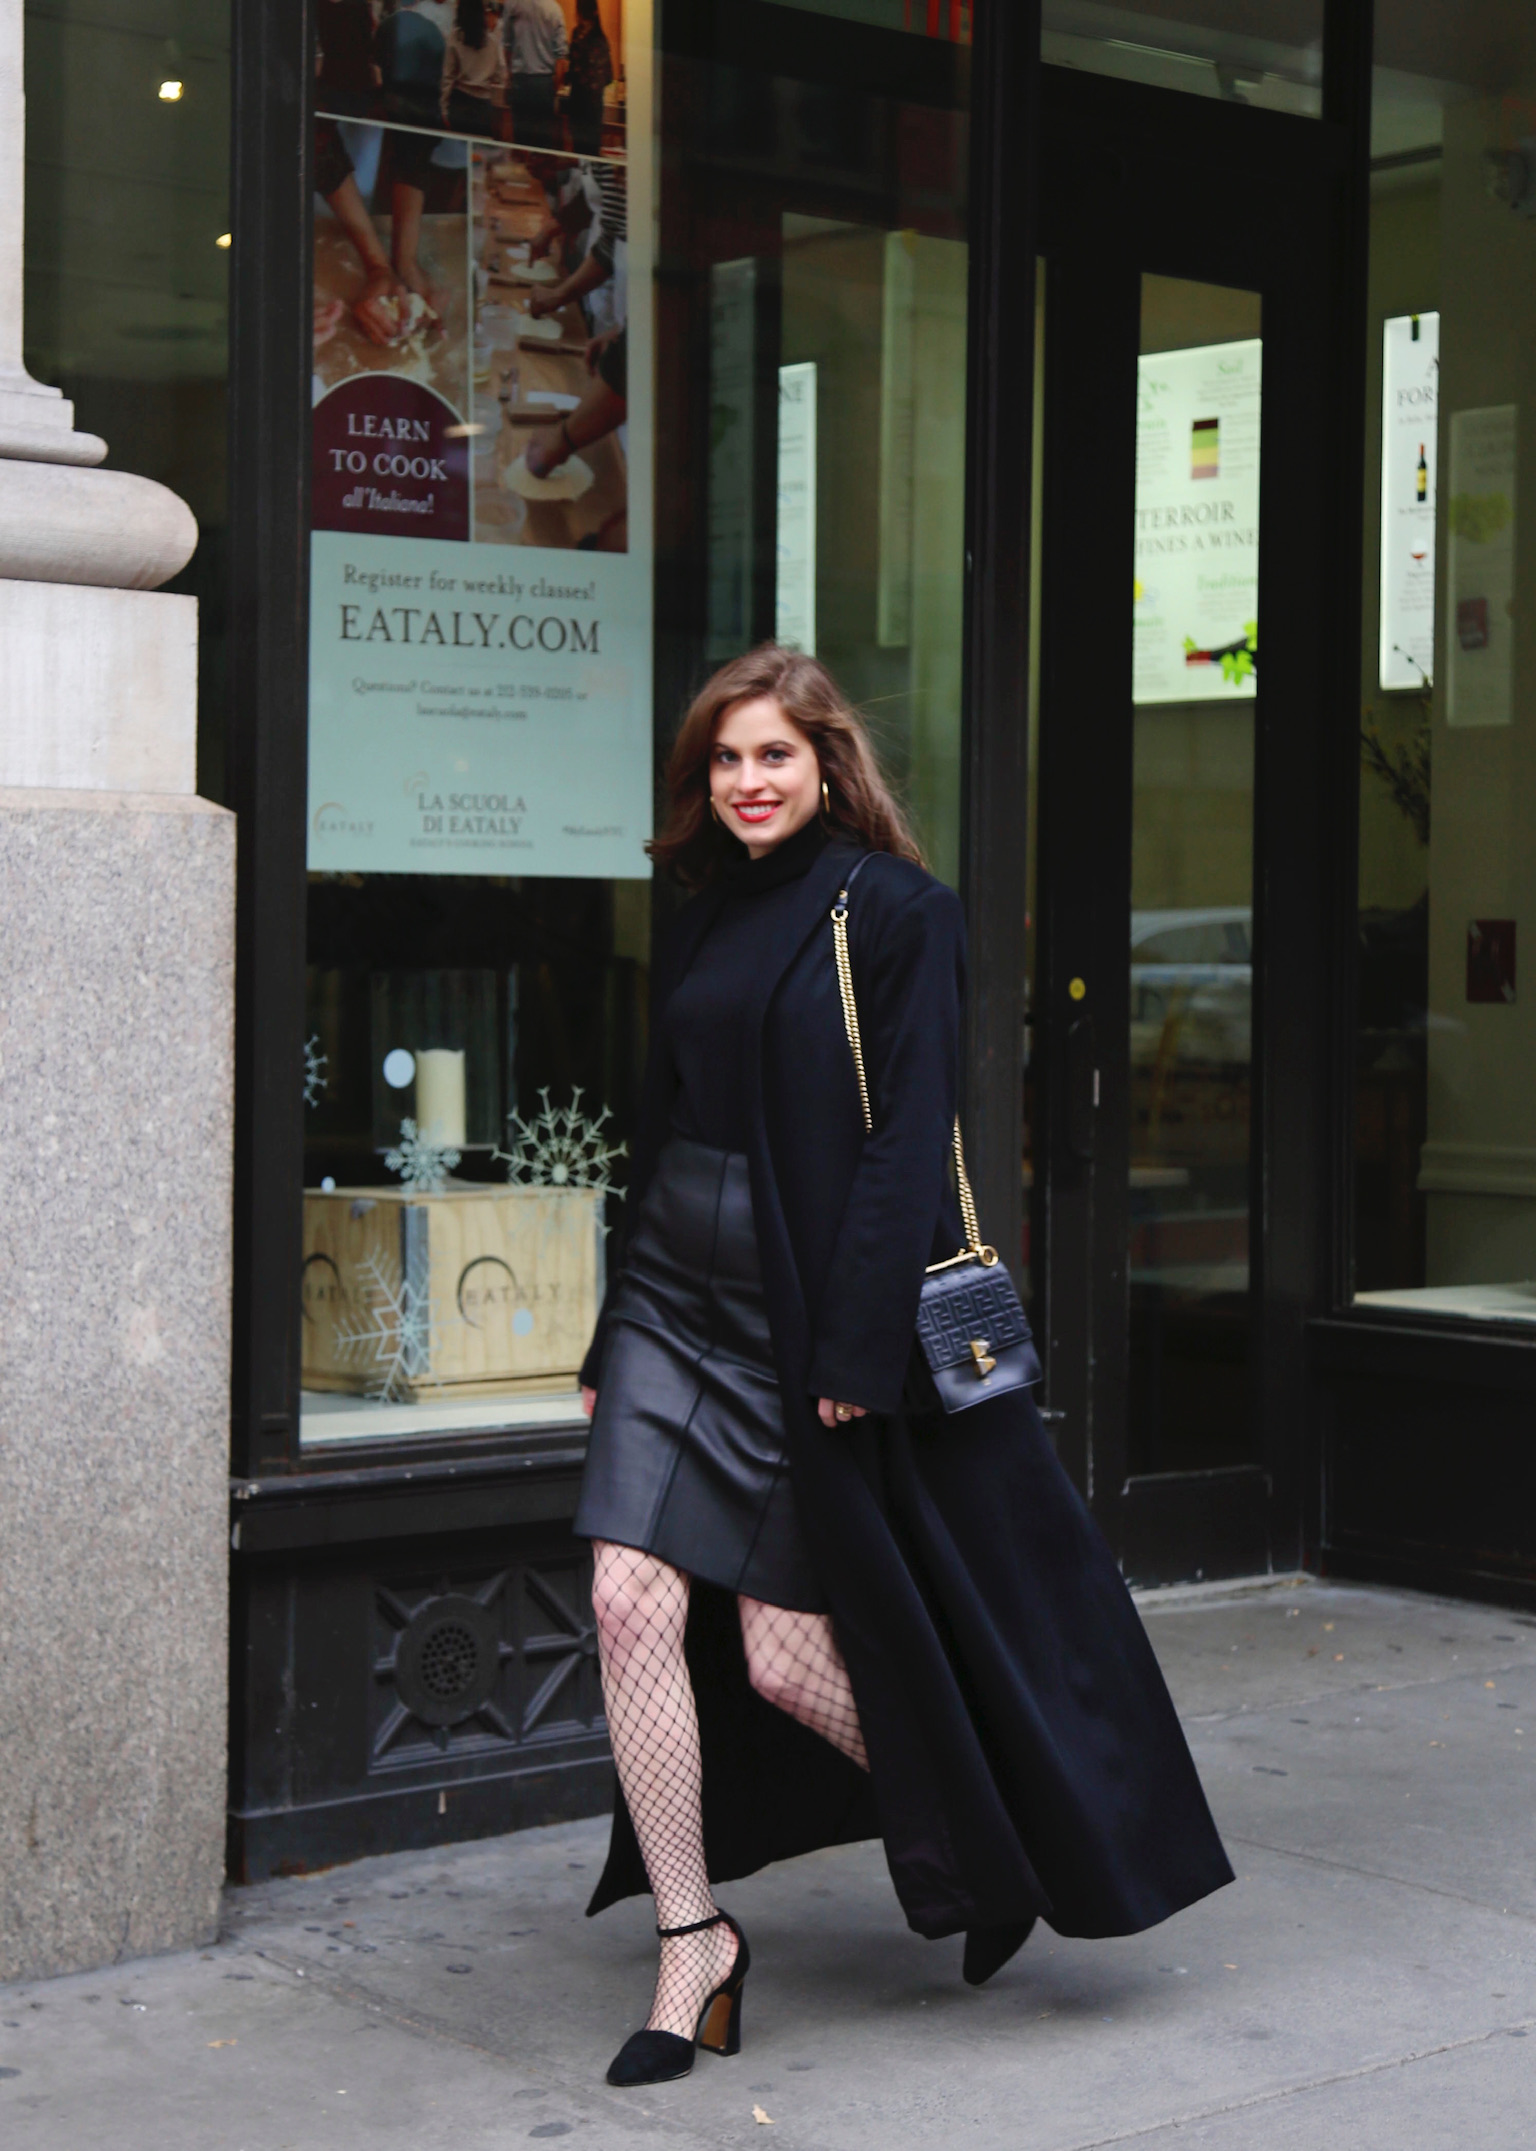 Woman walking down the street in Manhattan: with brown hair wearing a black coat, black turtleneck, black leather pencil skirt, black heels and carrying a black bag